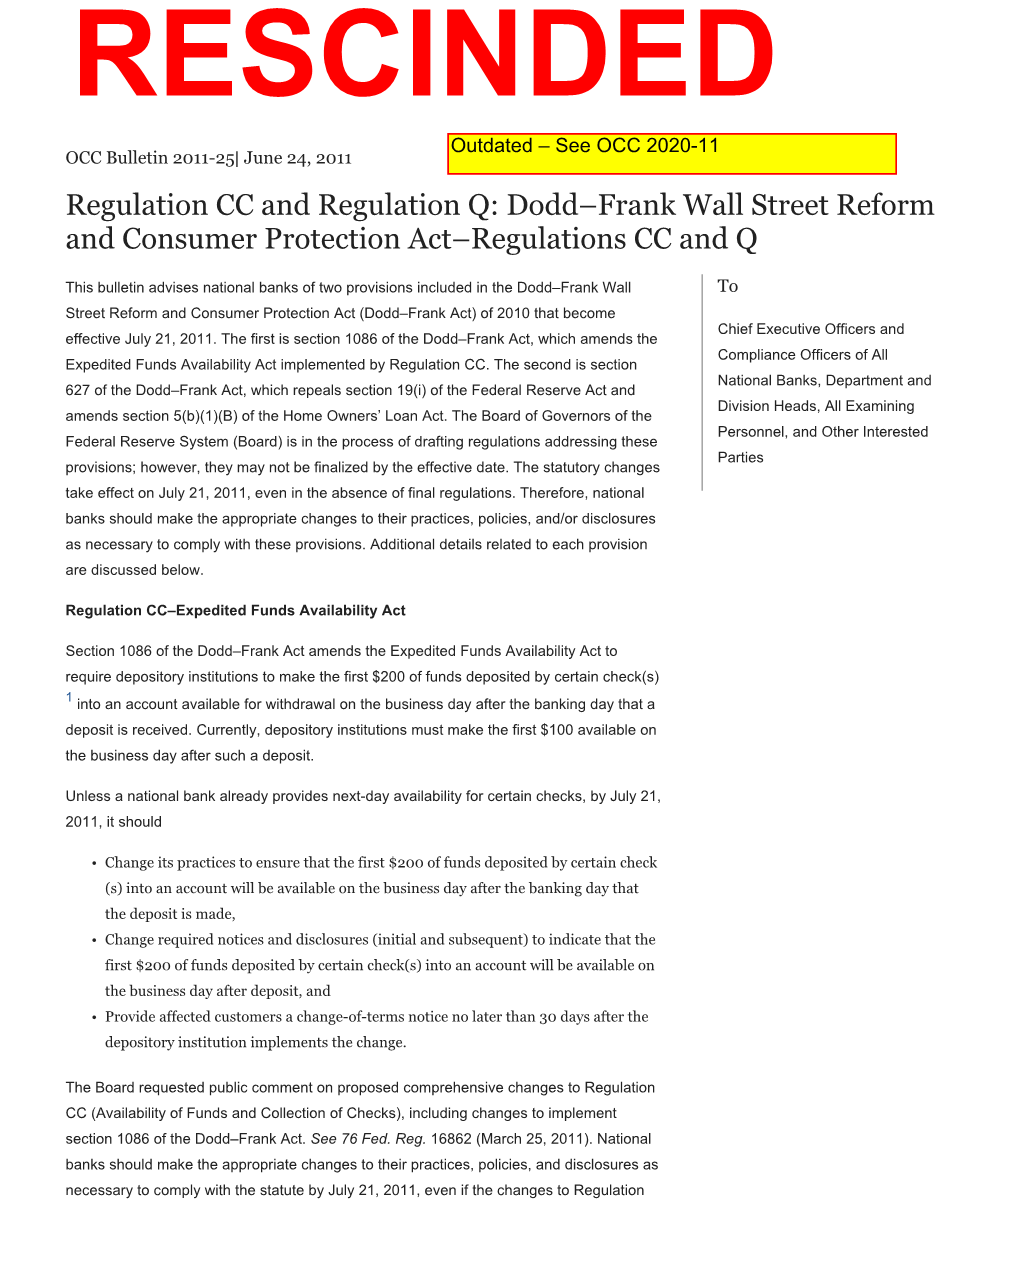 Dodd–Frank Wall Street Reform and Consumer Protection Act–Regulations CC and Q